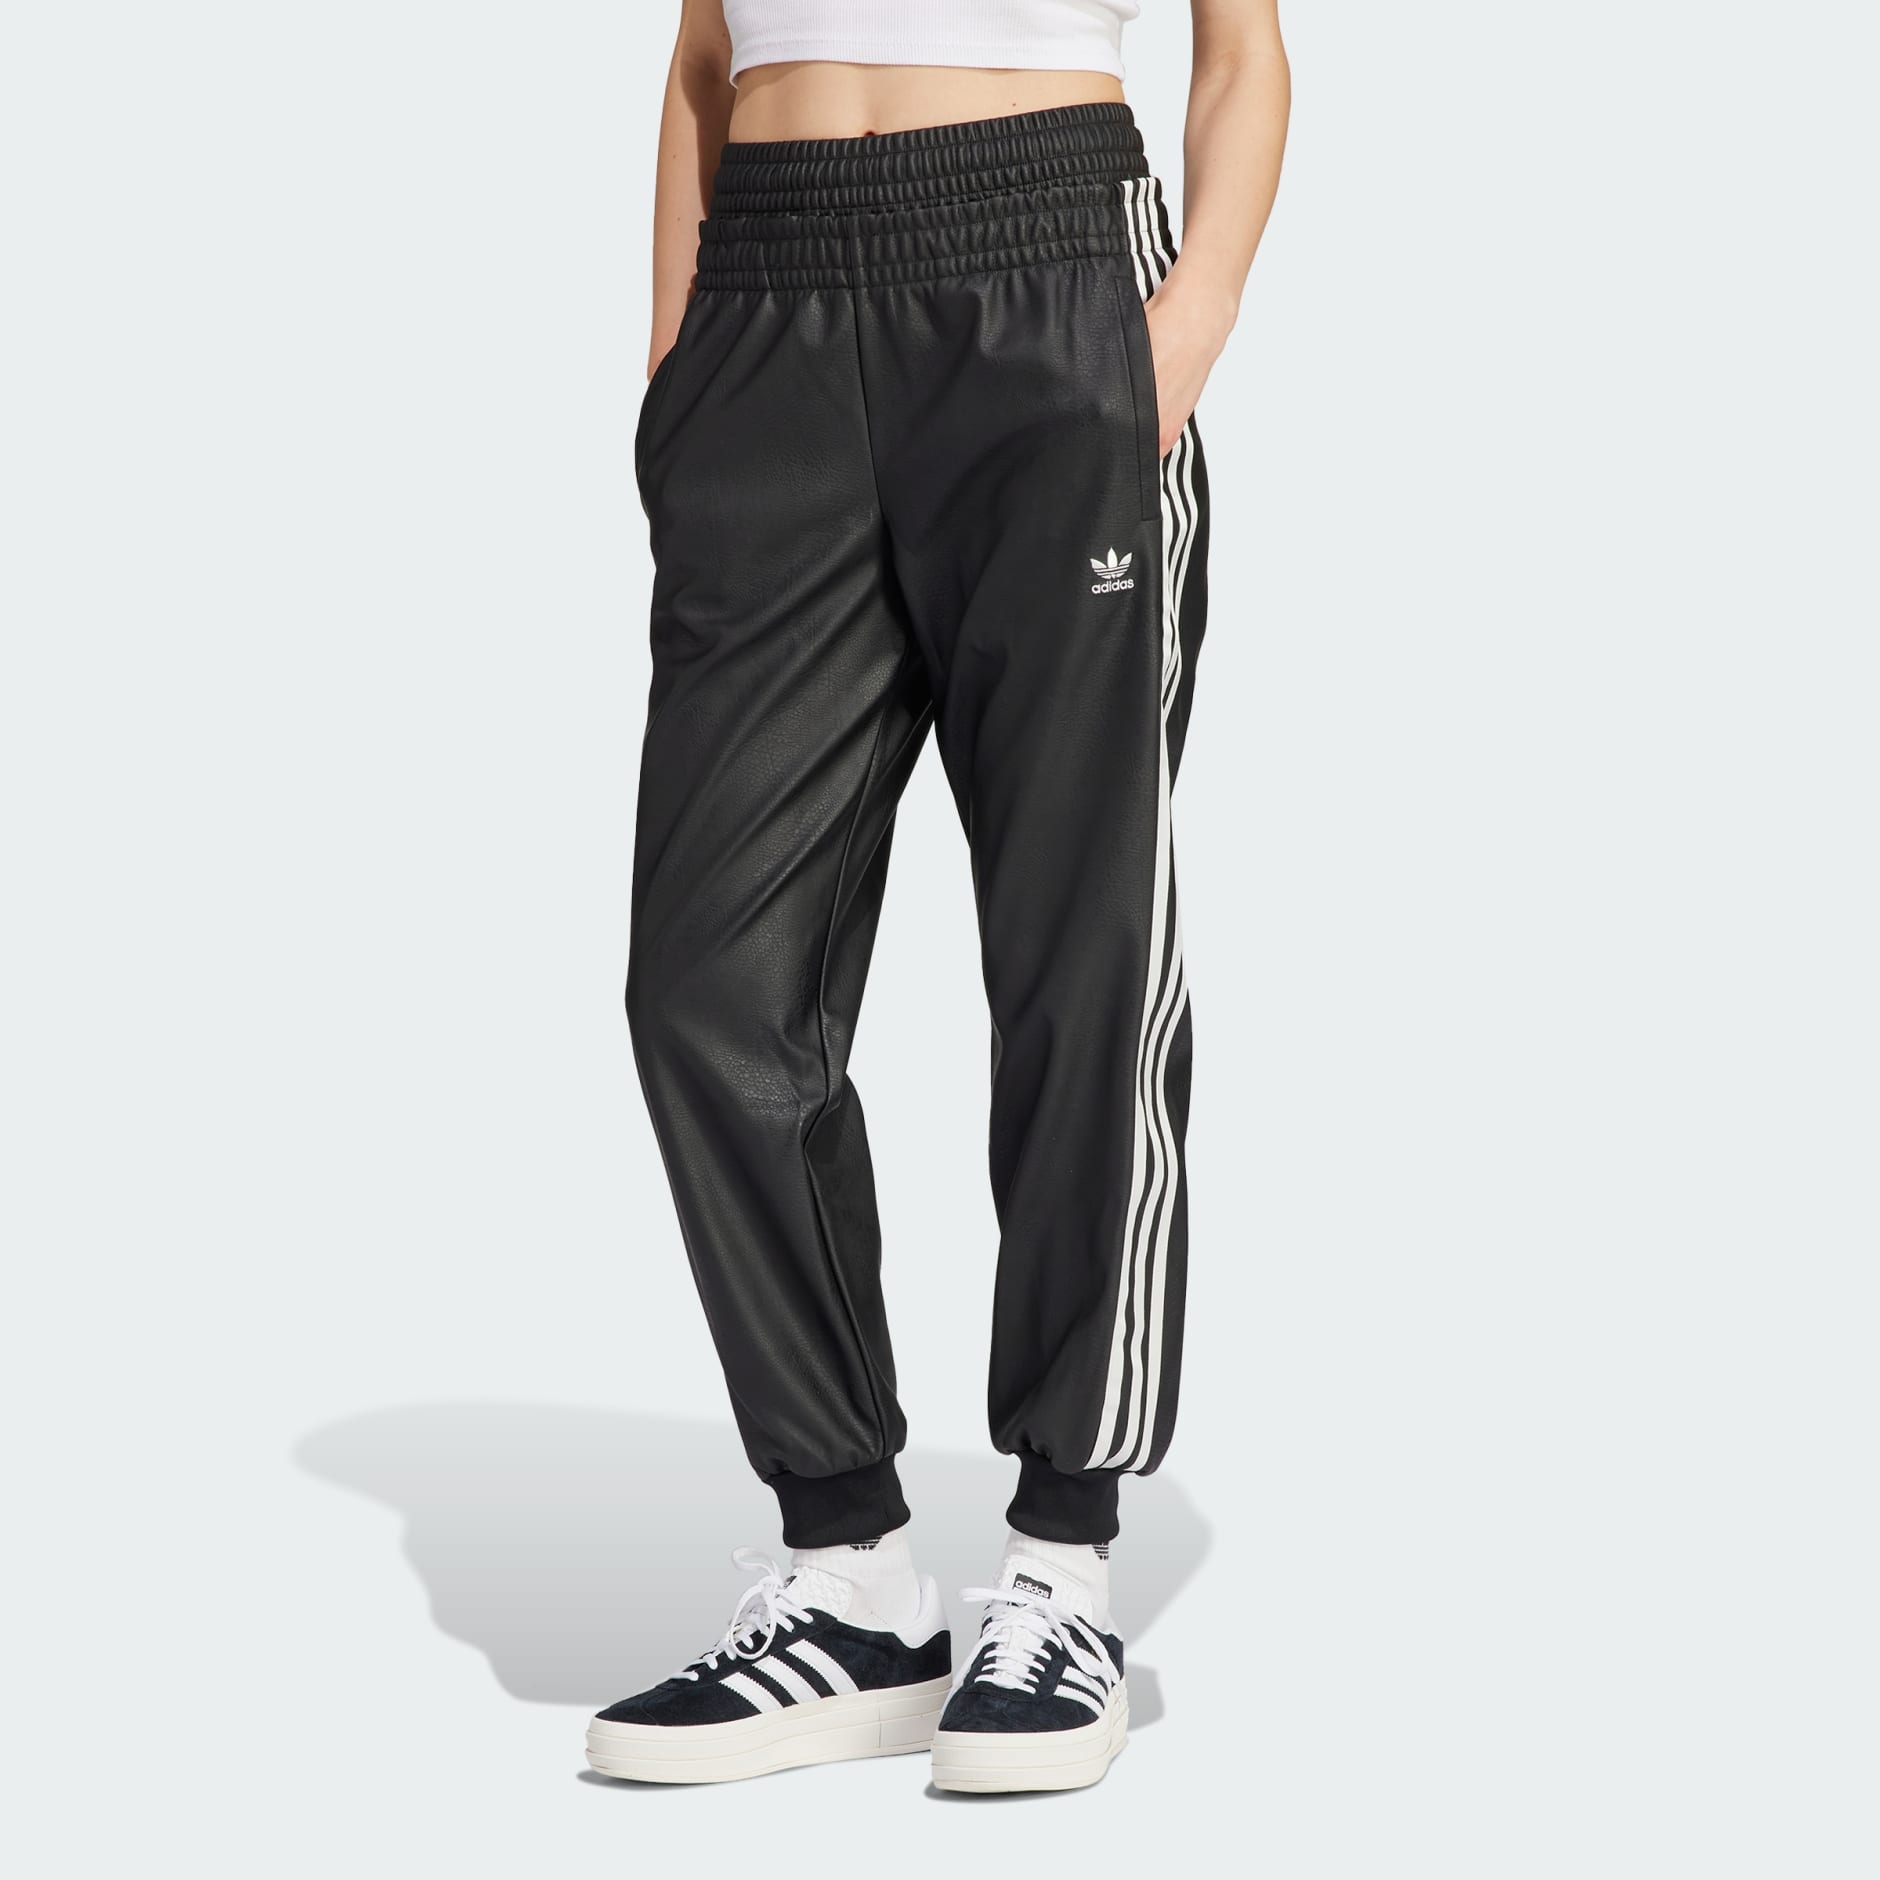 Women's Clothing - Faux Leather SST Track Pants - Black